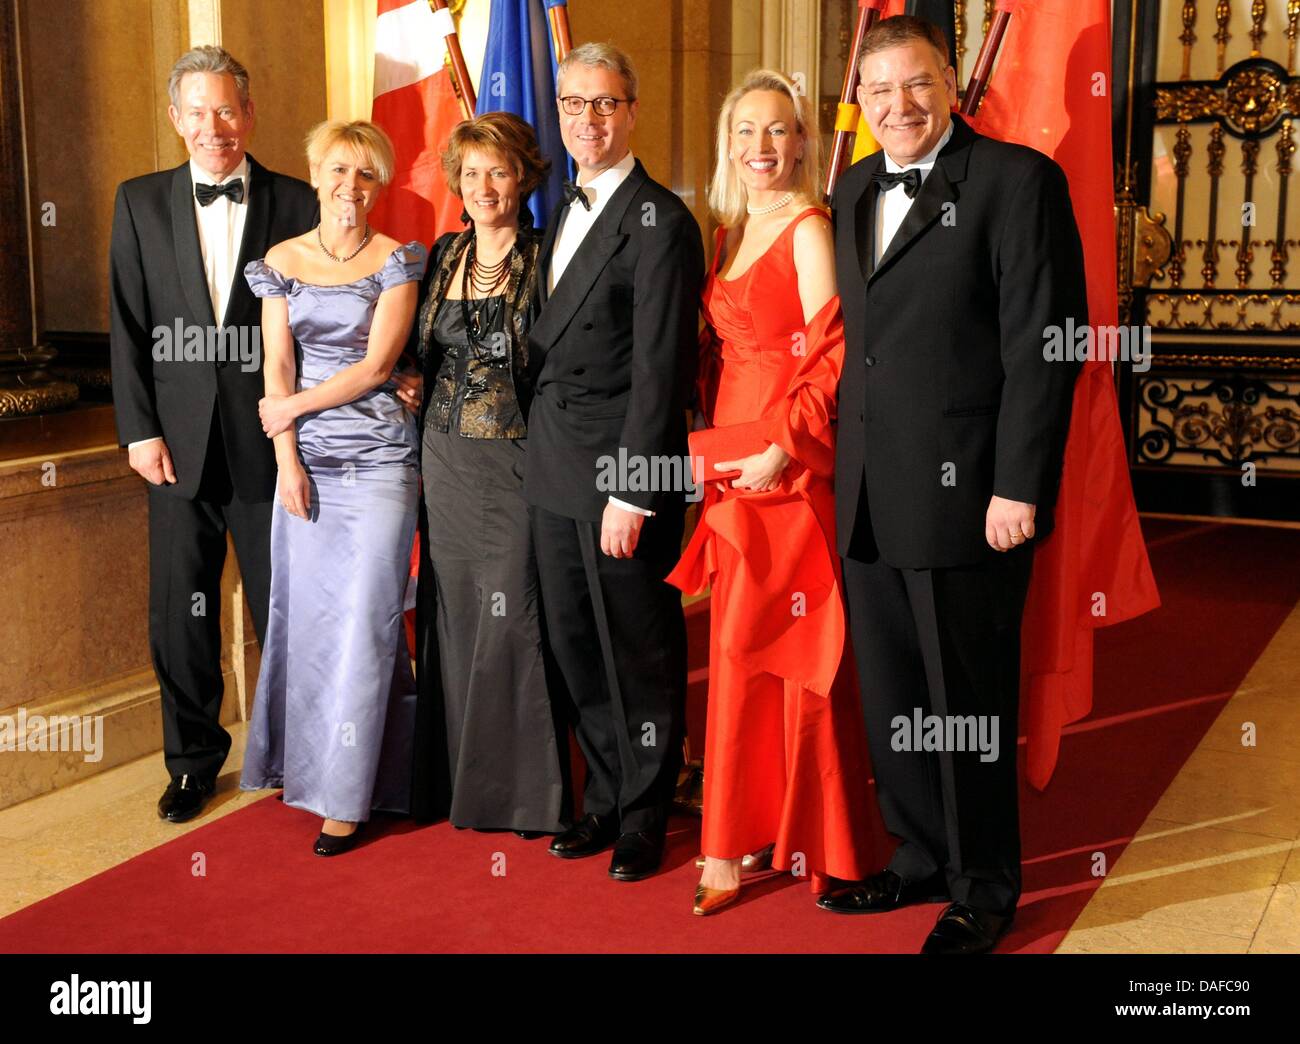 Peter Warming (L), husband of Danish Climate and Energy Minister Lykke Friis (2-L), German Environment Minister Norbert Roettgen (C), his wife Ebba Harfs-Roettgen (3-L), Hamburg's mayor Christoph Ahlhaus (R) and his wife Simone Ahlhaus pose during the traditional Matthiae-Mahlzeit in Hamburg, Germany, 18 February 2011. The oldest feast in the world was celebrated for the first time Stock Photo